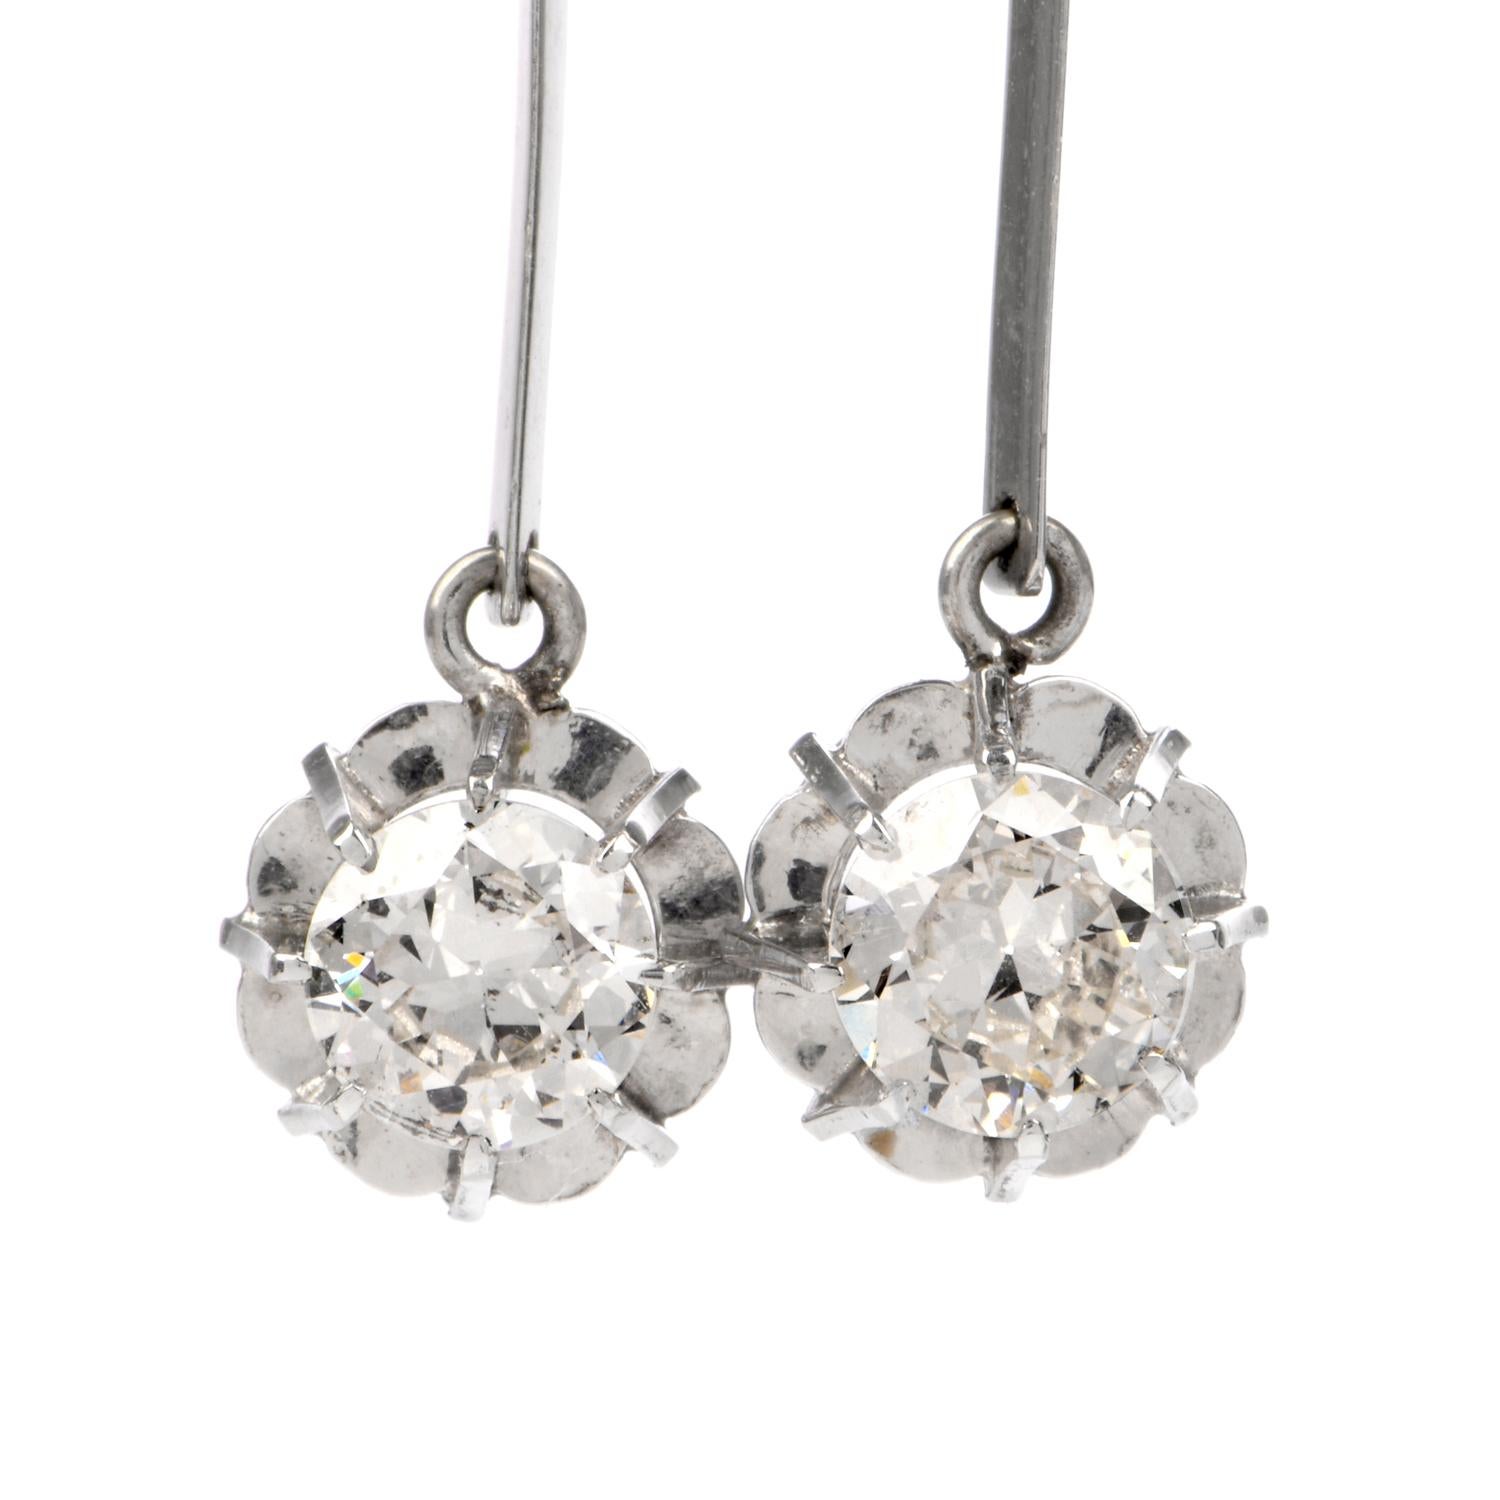 This chic pair of diamond dangle drop earrings is crafted in solid platinum, weighing 3.8 grams and measuring 37mm long x 9mm wide. Centered with a pair of old european-brilliant diamonds prong-set into baskets at the drop and a pair of smaller